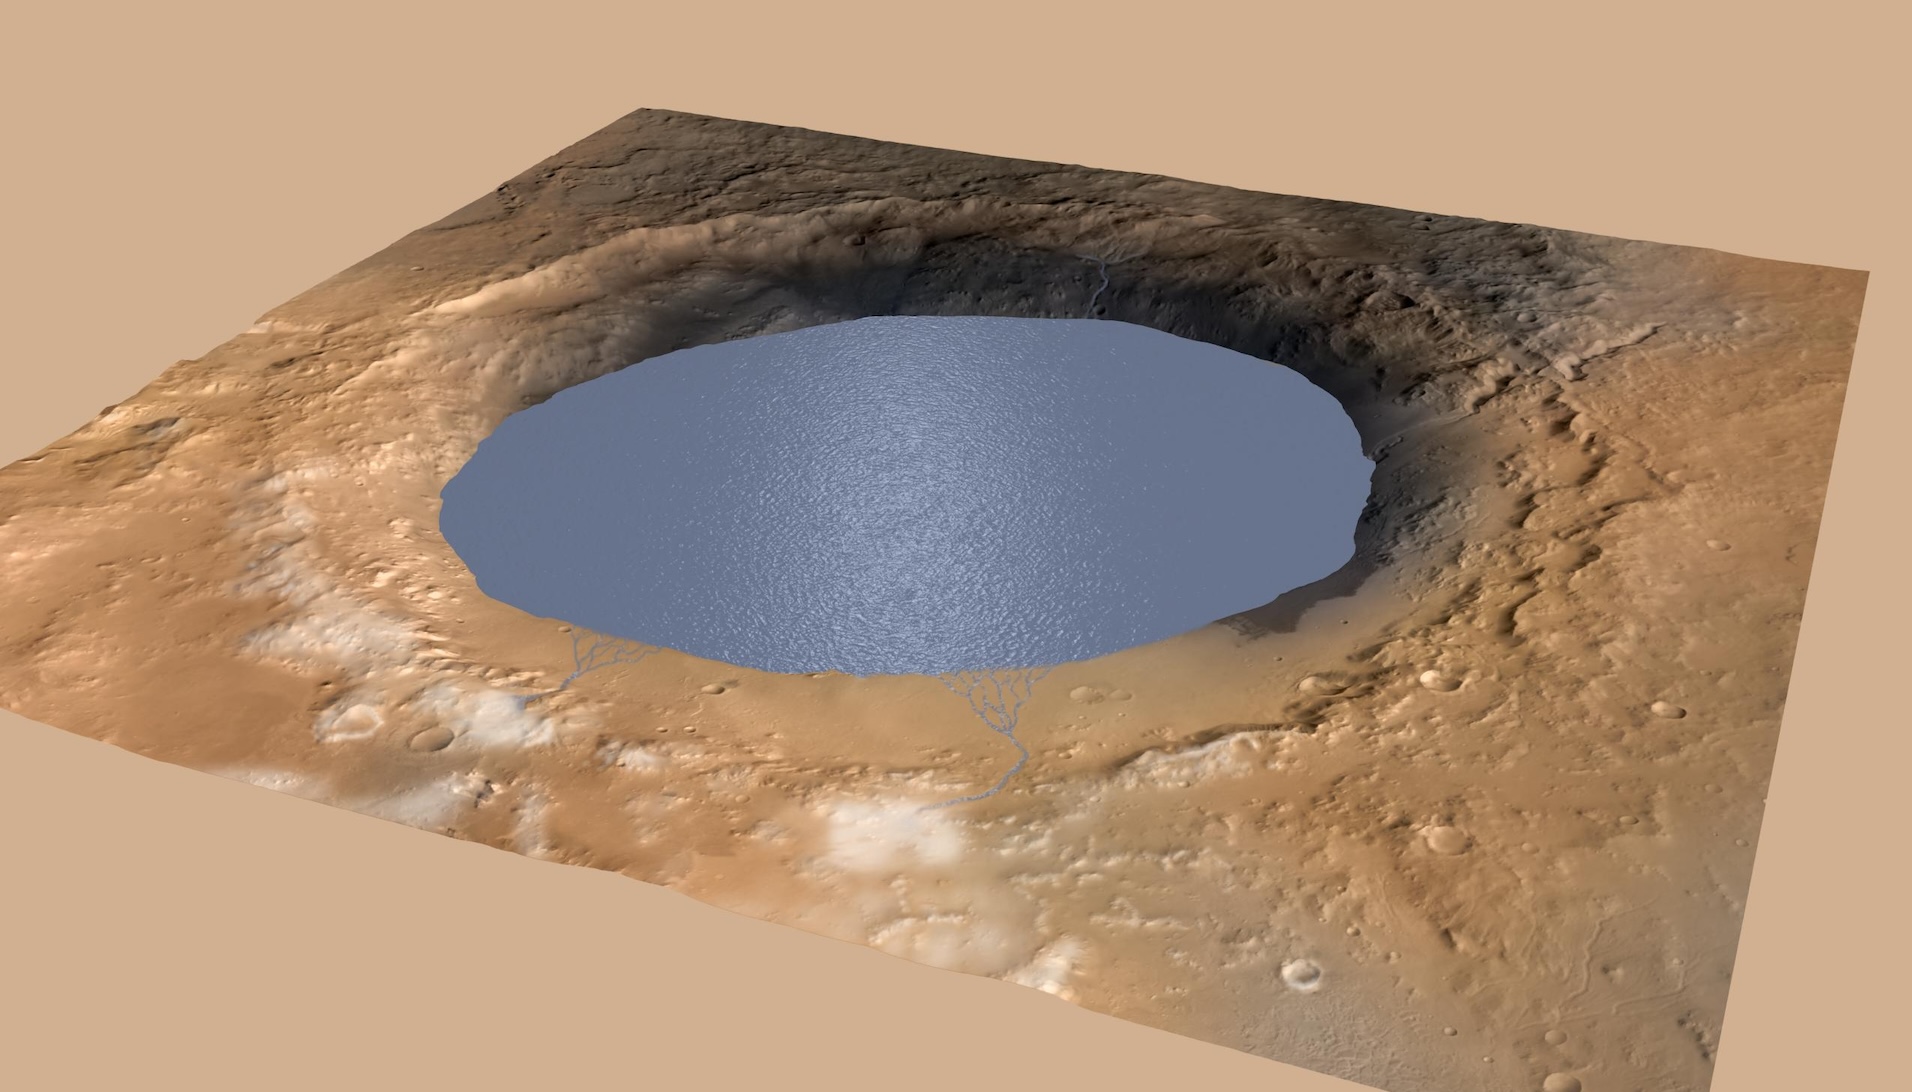 A simulated view of Gale Crater filled with water, as it may have appeared millions of years ago.